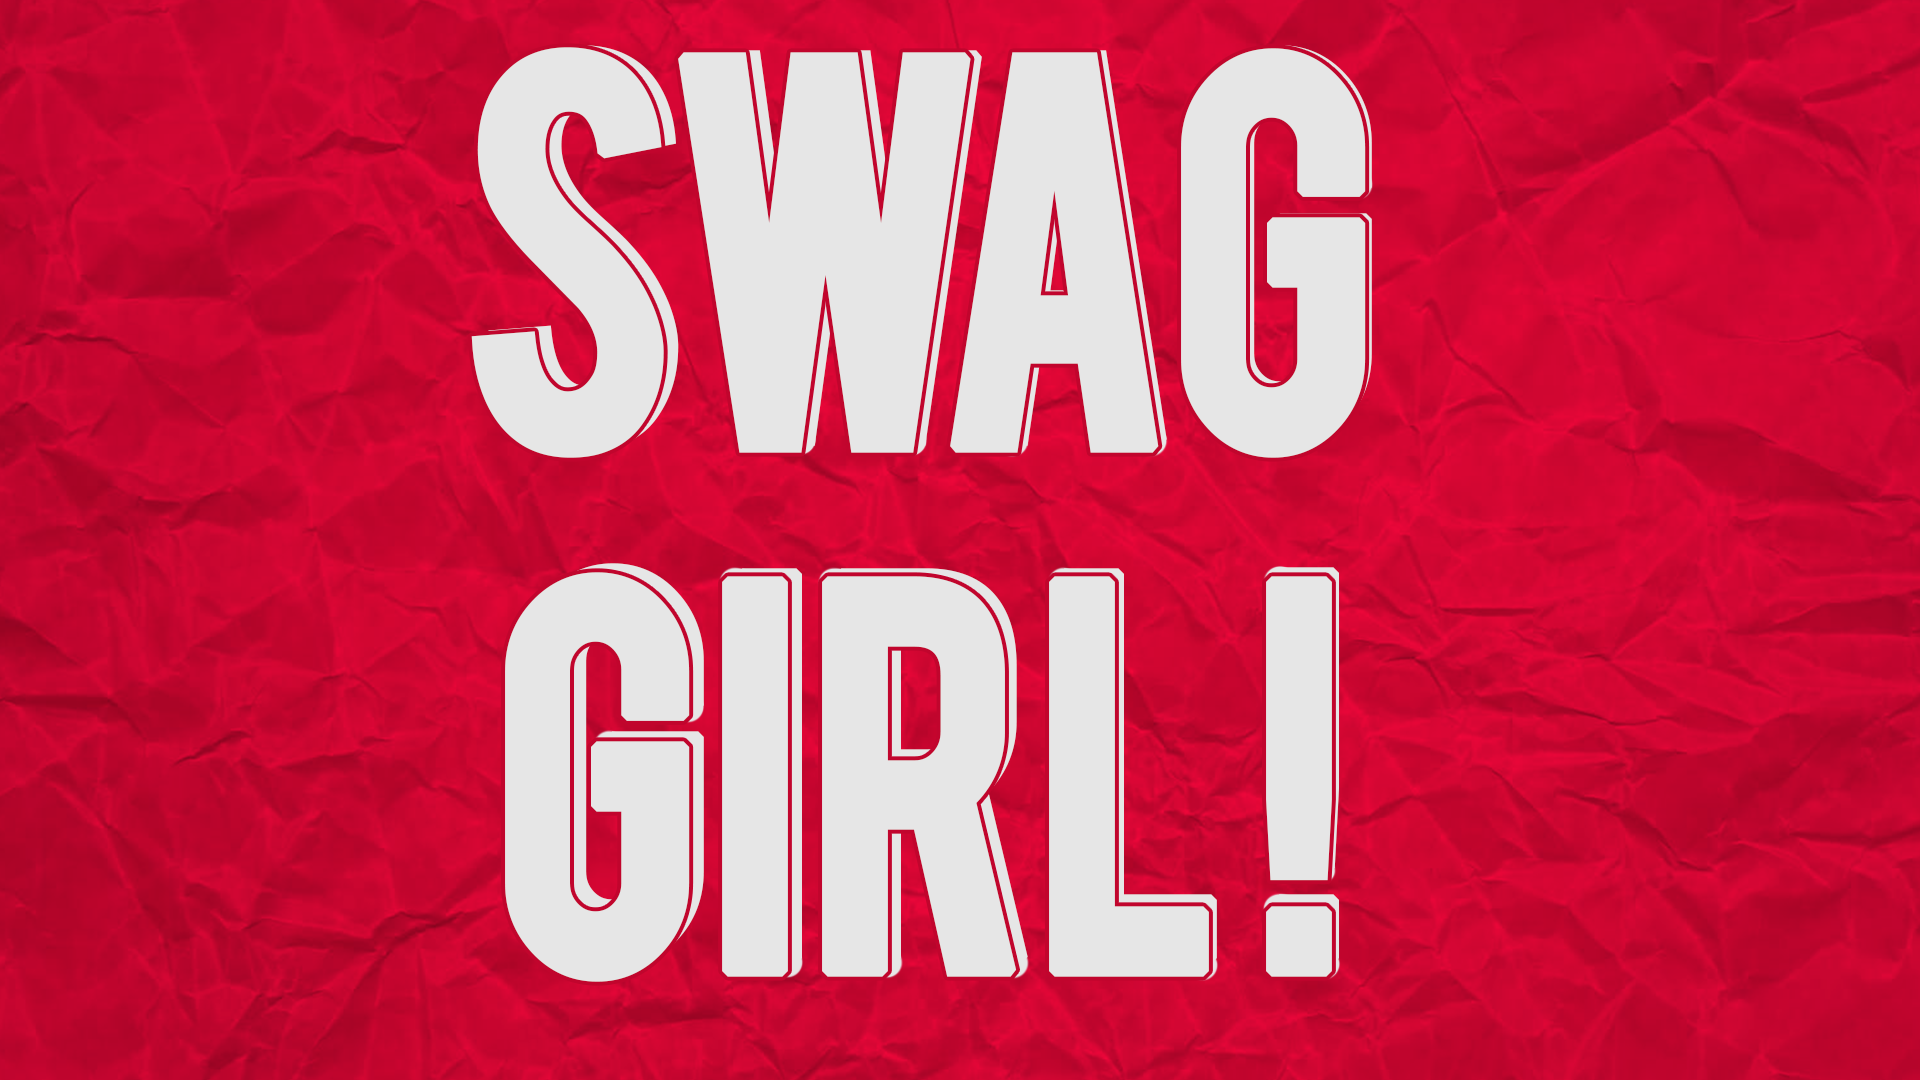 Swag girl wallpapers and images - wallpapers, pictures, photos